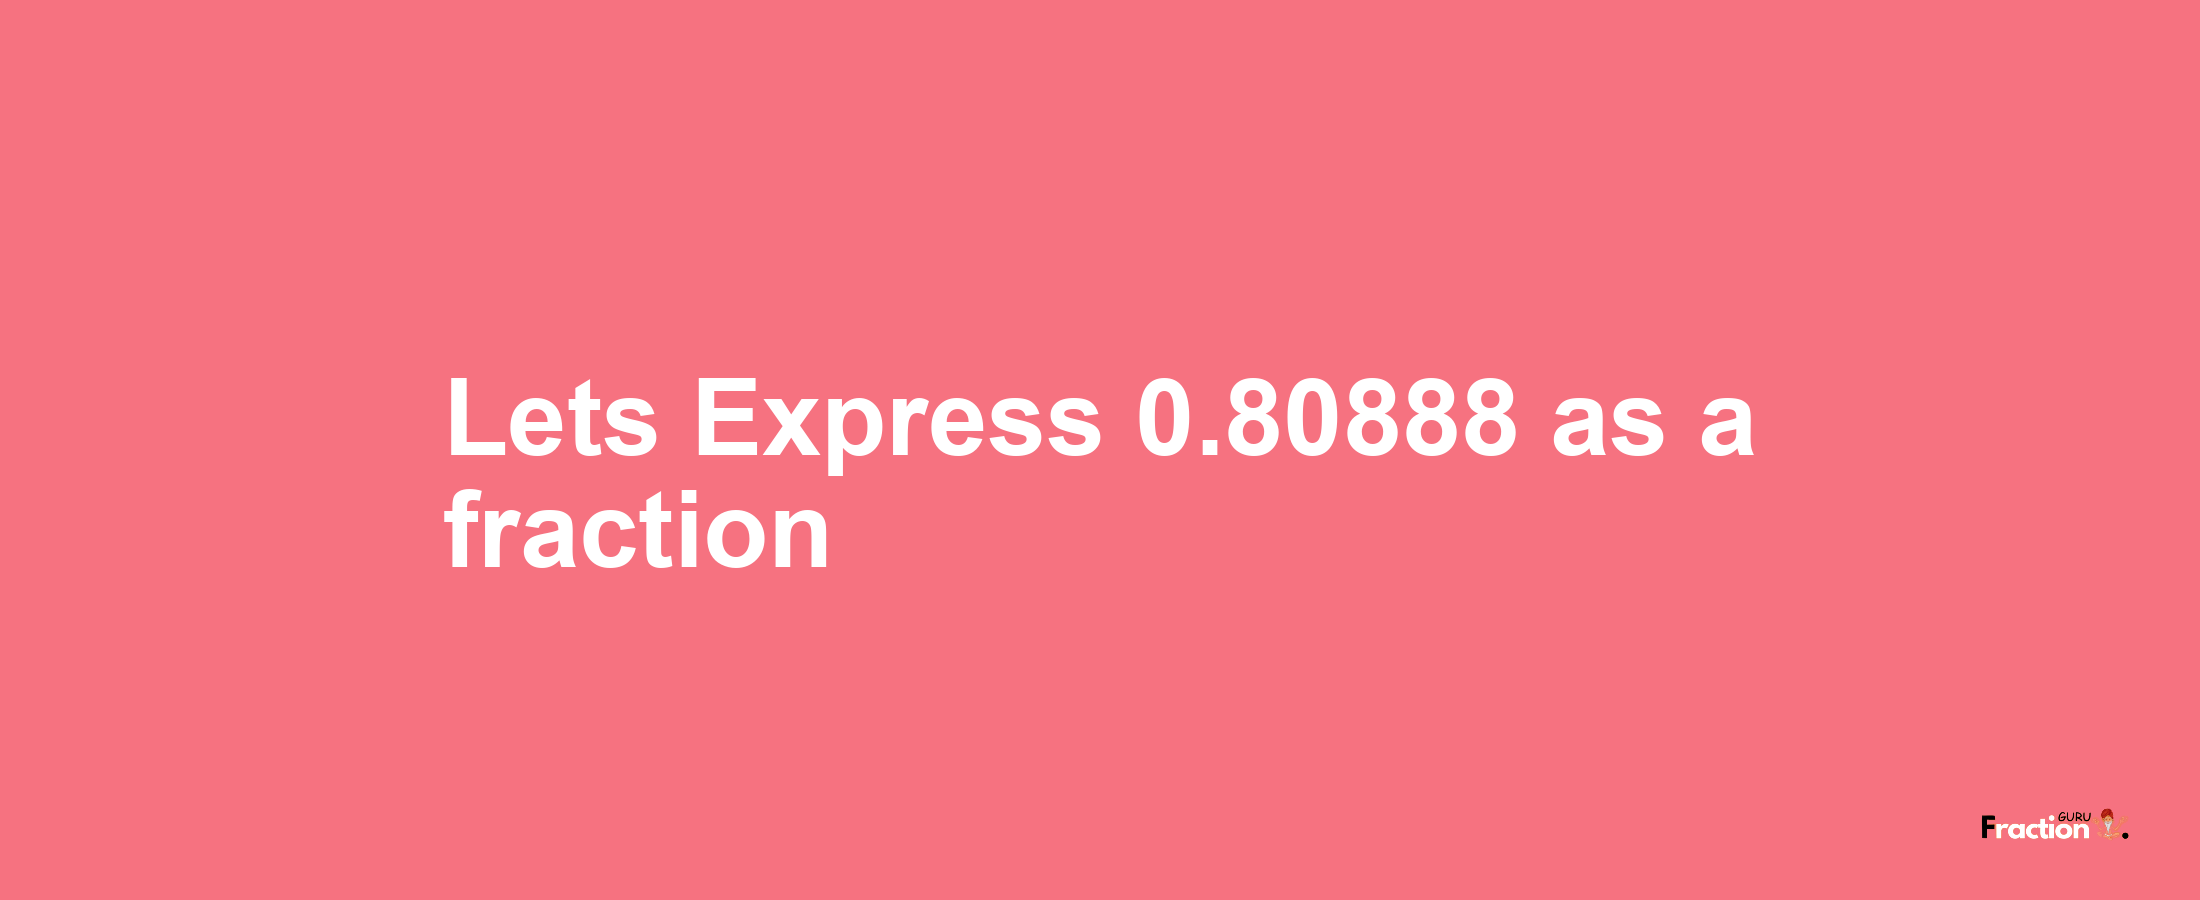 Lets Express 0.80888 as afraction